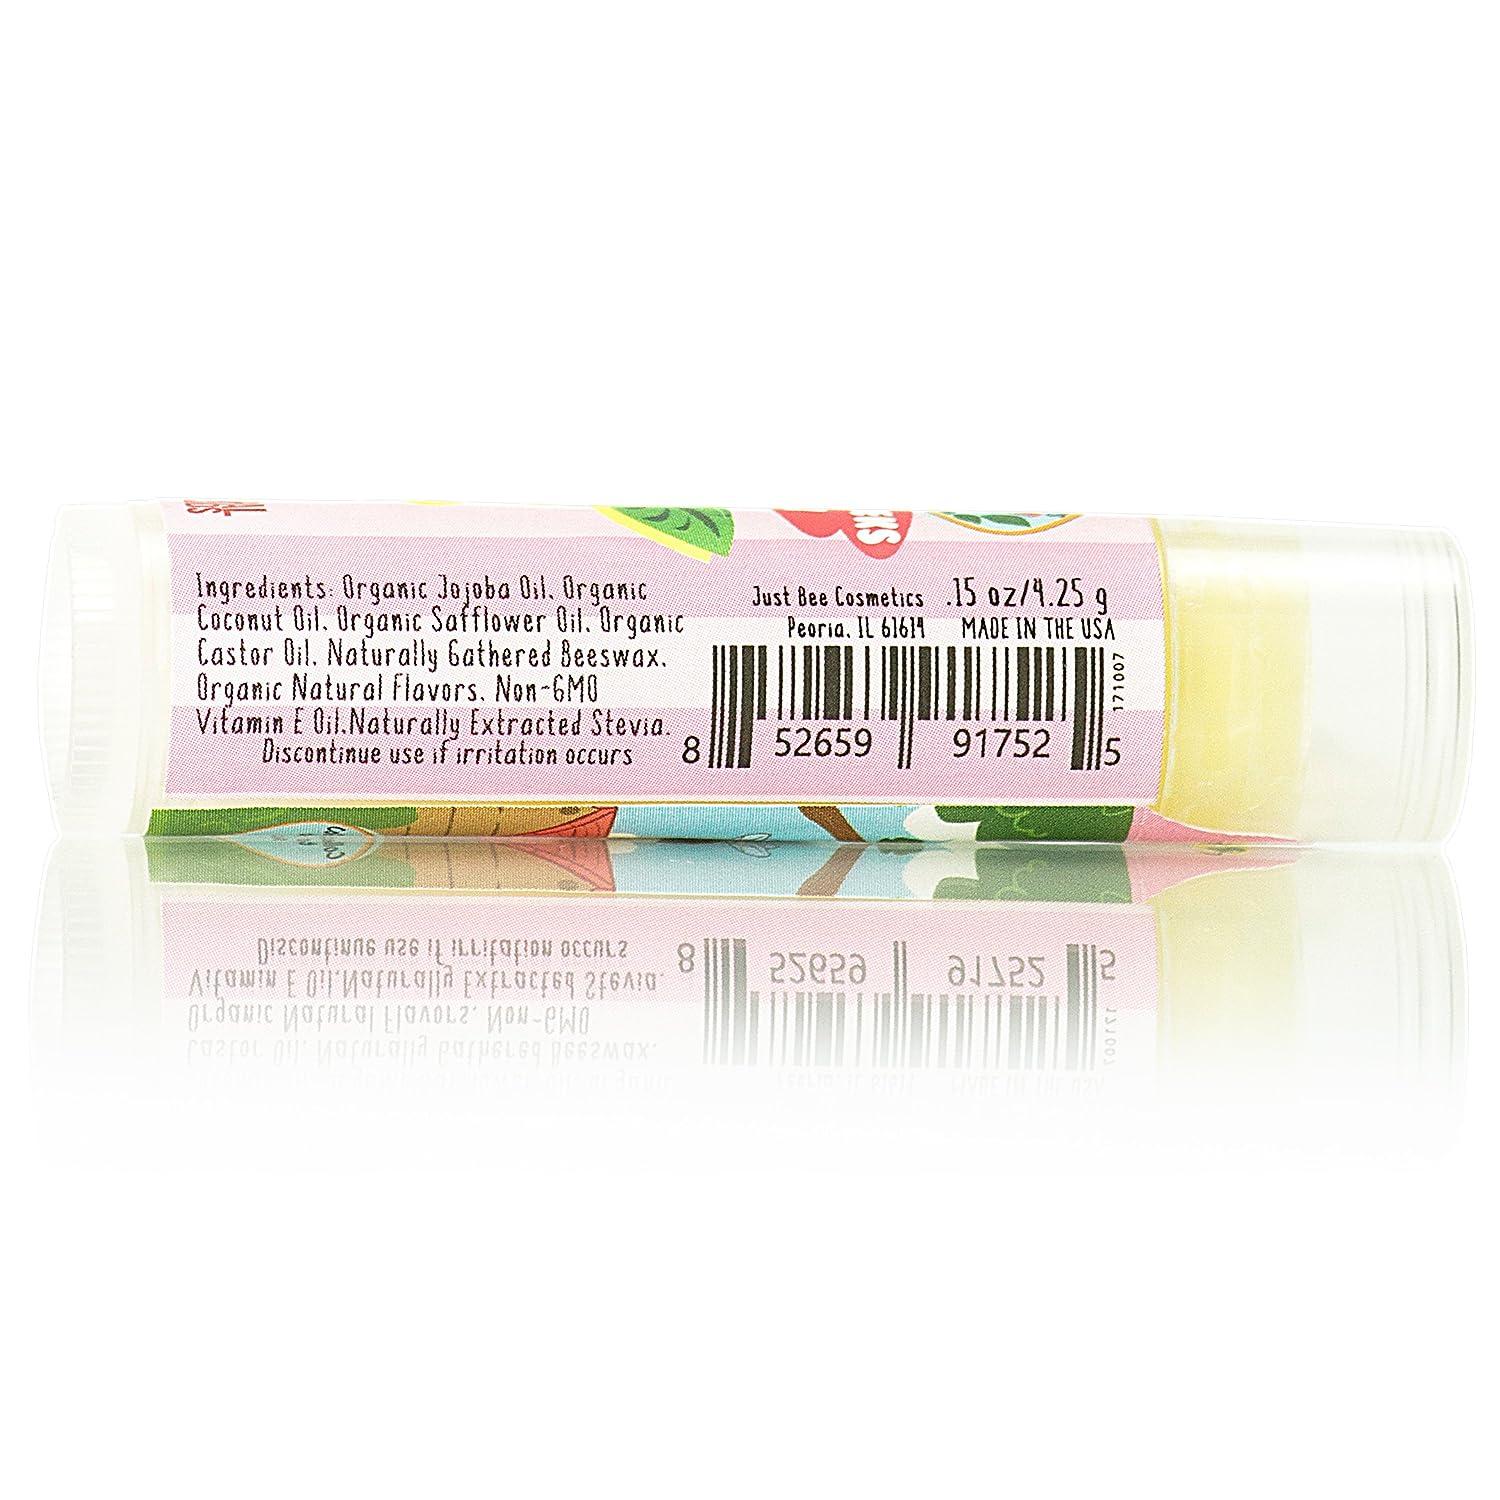 Lappy Lips Organic 100% Natural Lip Balm Chap stick for Kids Toddlers (6  flavors) - Organic Essential Oil - for Dry Chapped Lips to Restore and Heal  and Make Kids Happy All flavors